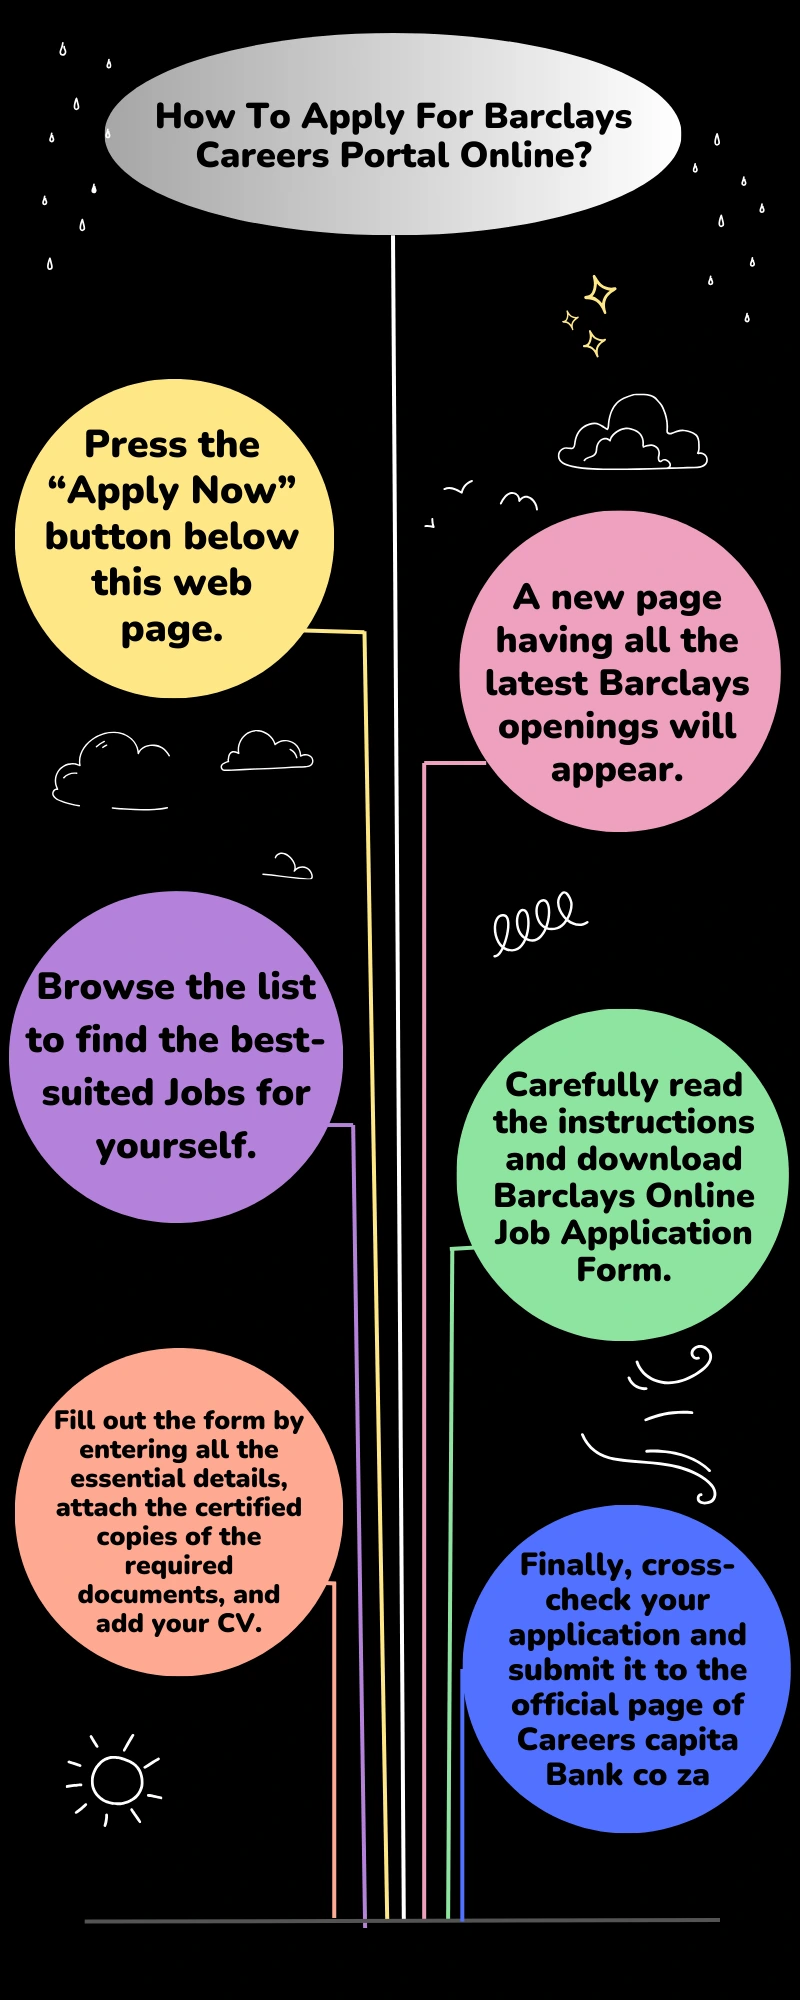 How To Apply For Barclays Careers Portal Online?